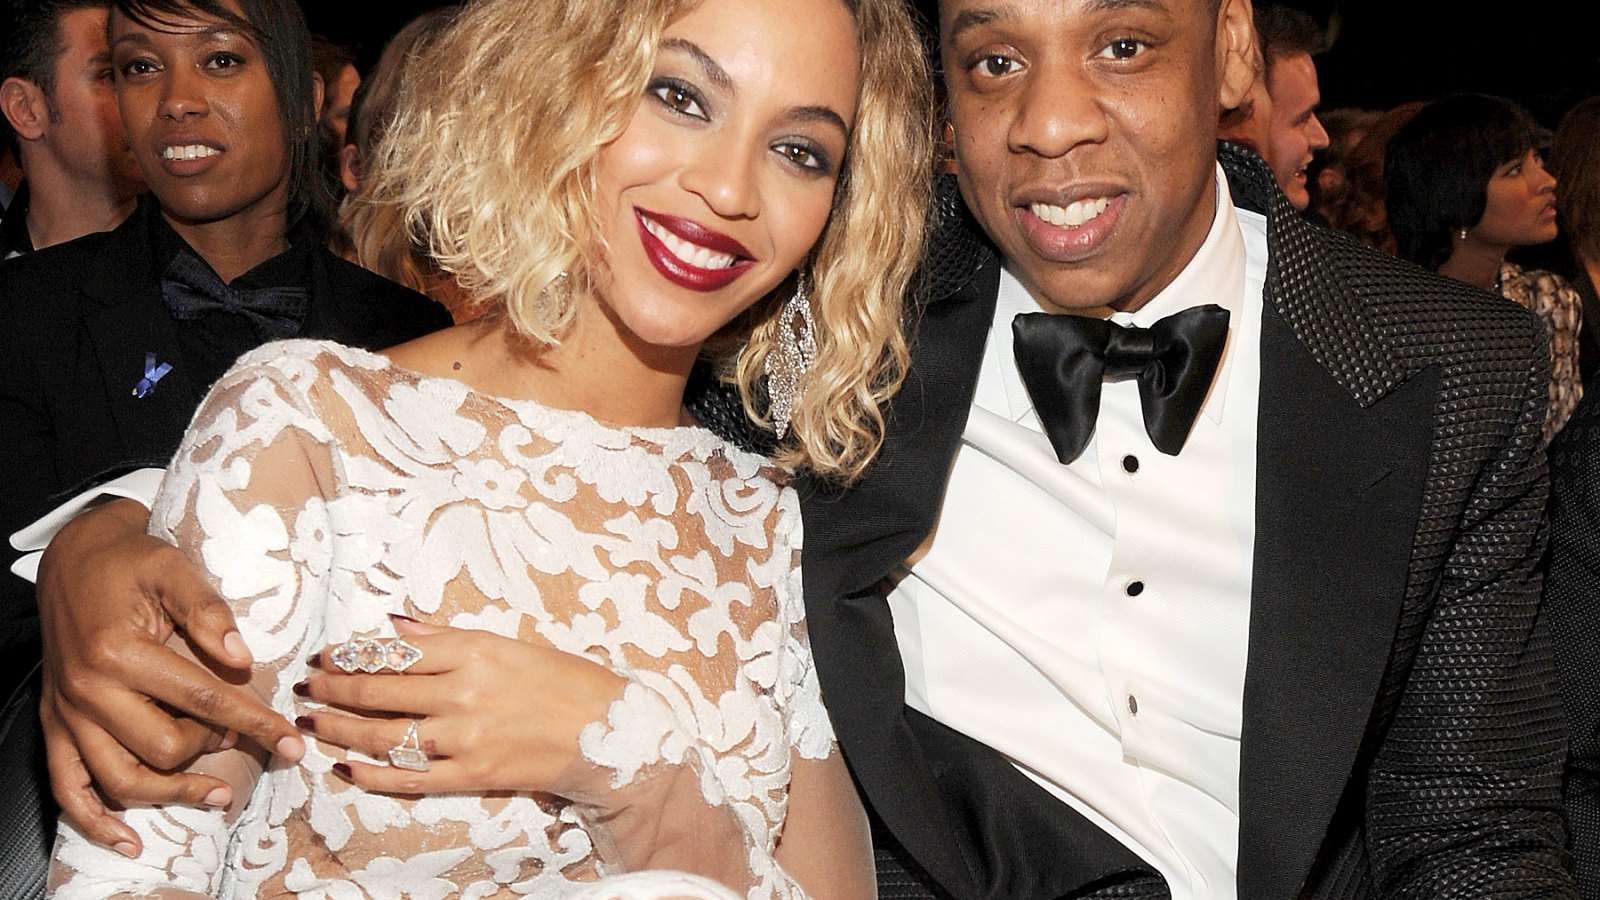 Beyonce and Jay-Z at the Grammy Awards on January 26, 2014